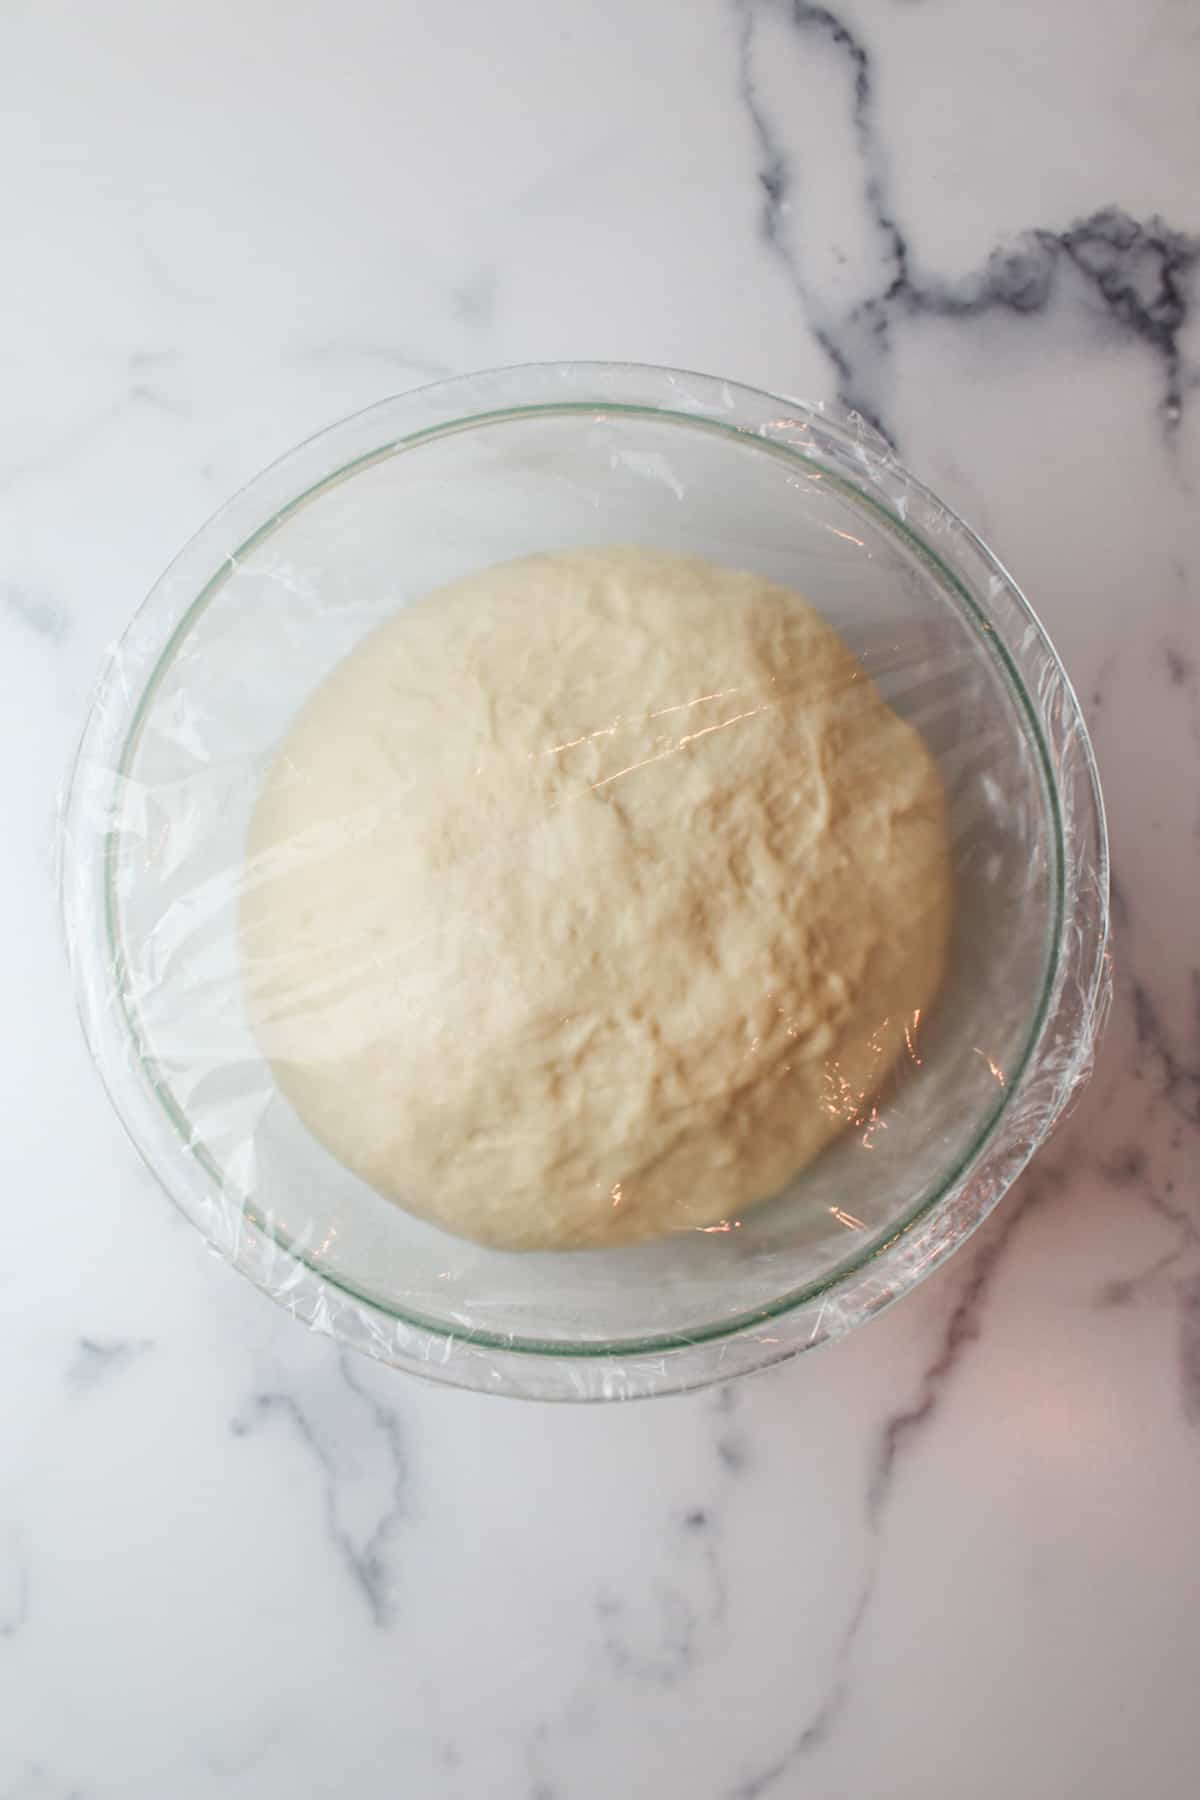 proofed dough in a mixing bowl covered in plastic wrap.